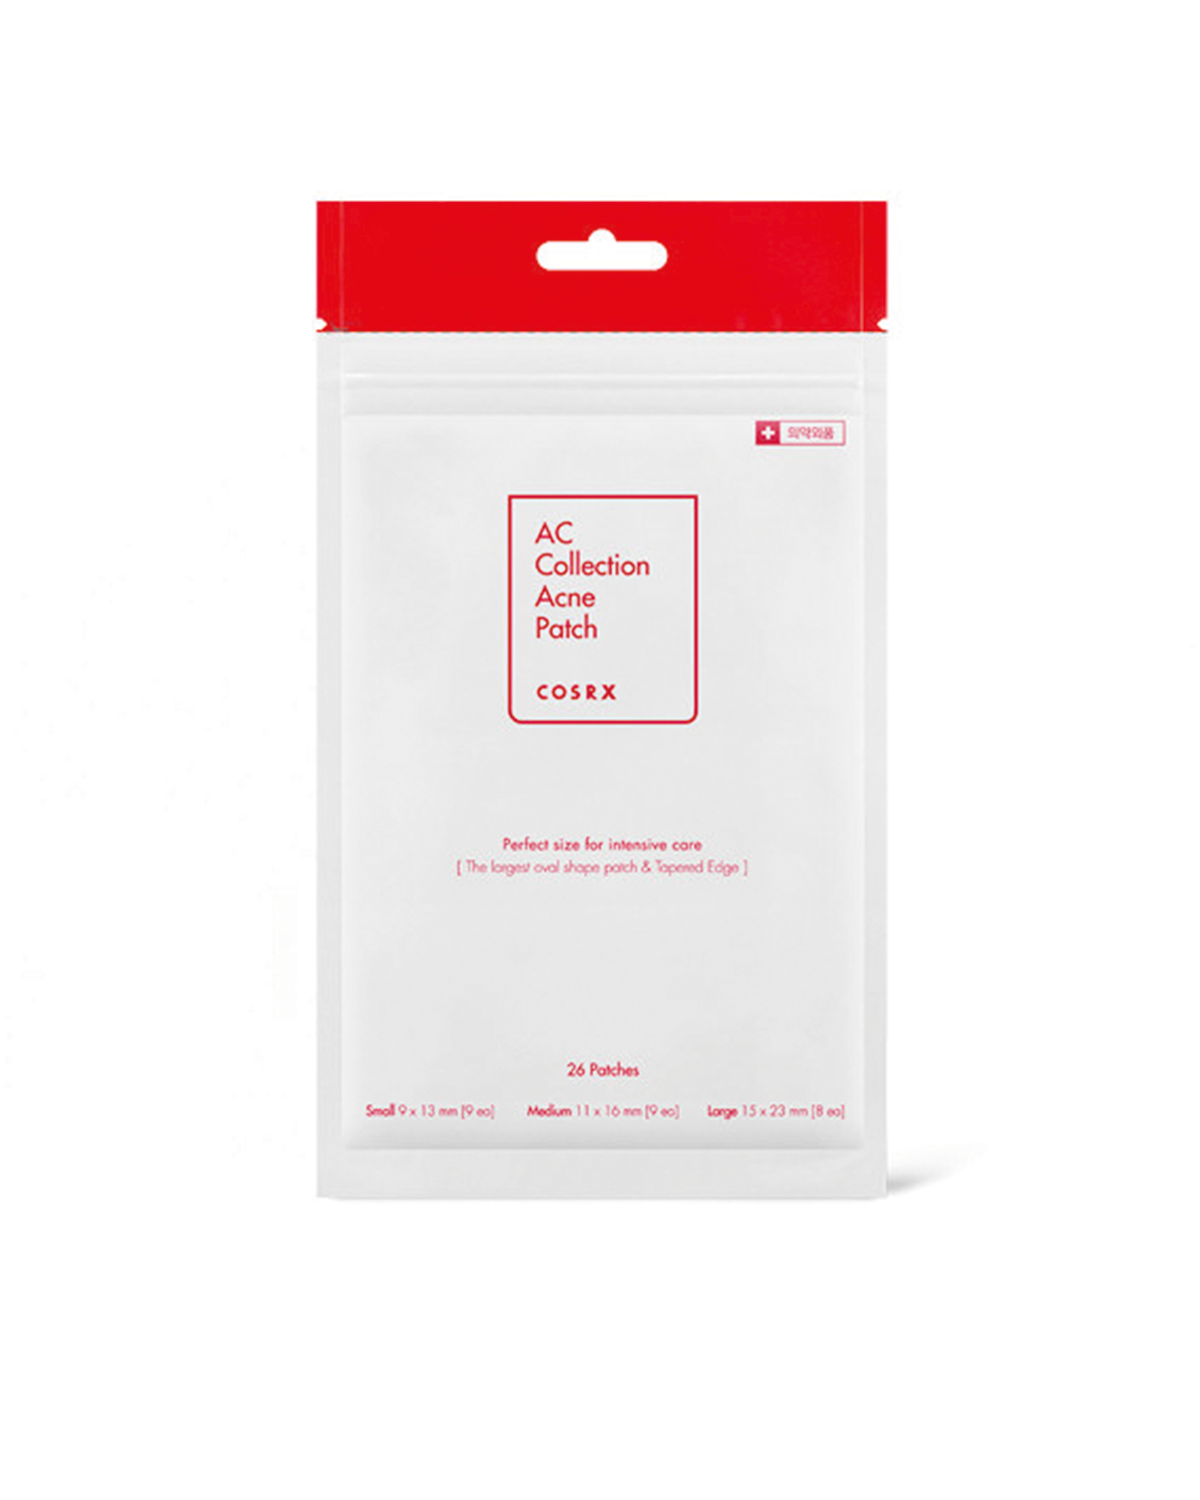 COSRX AC Collection Acne Patch 26 ea